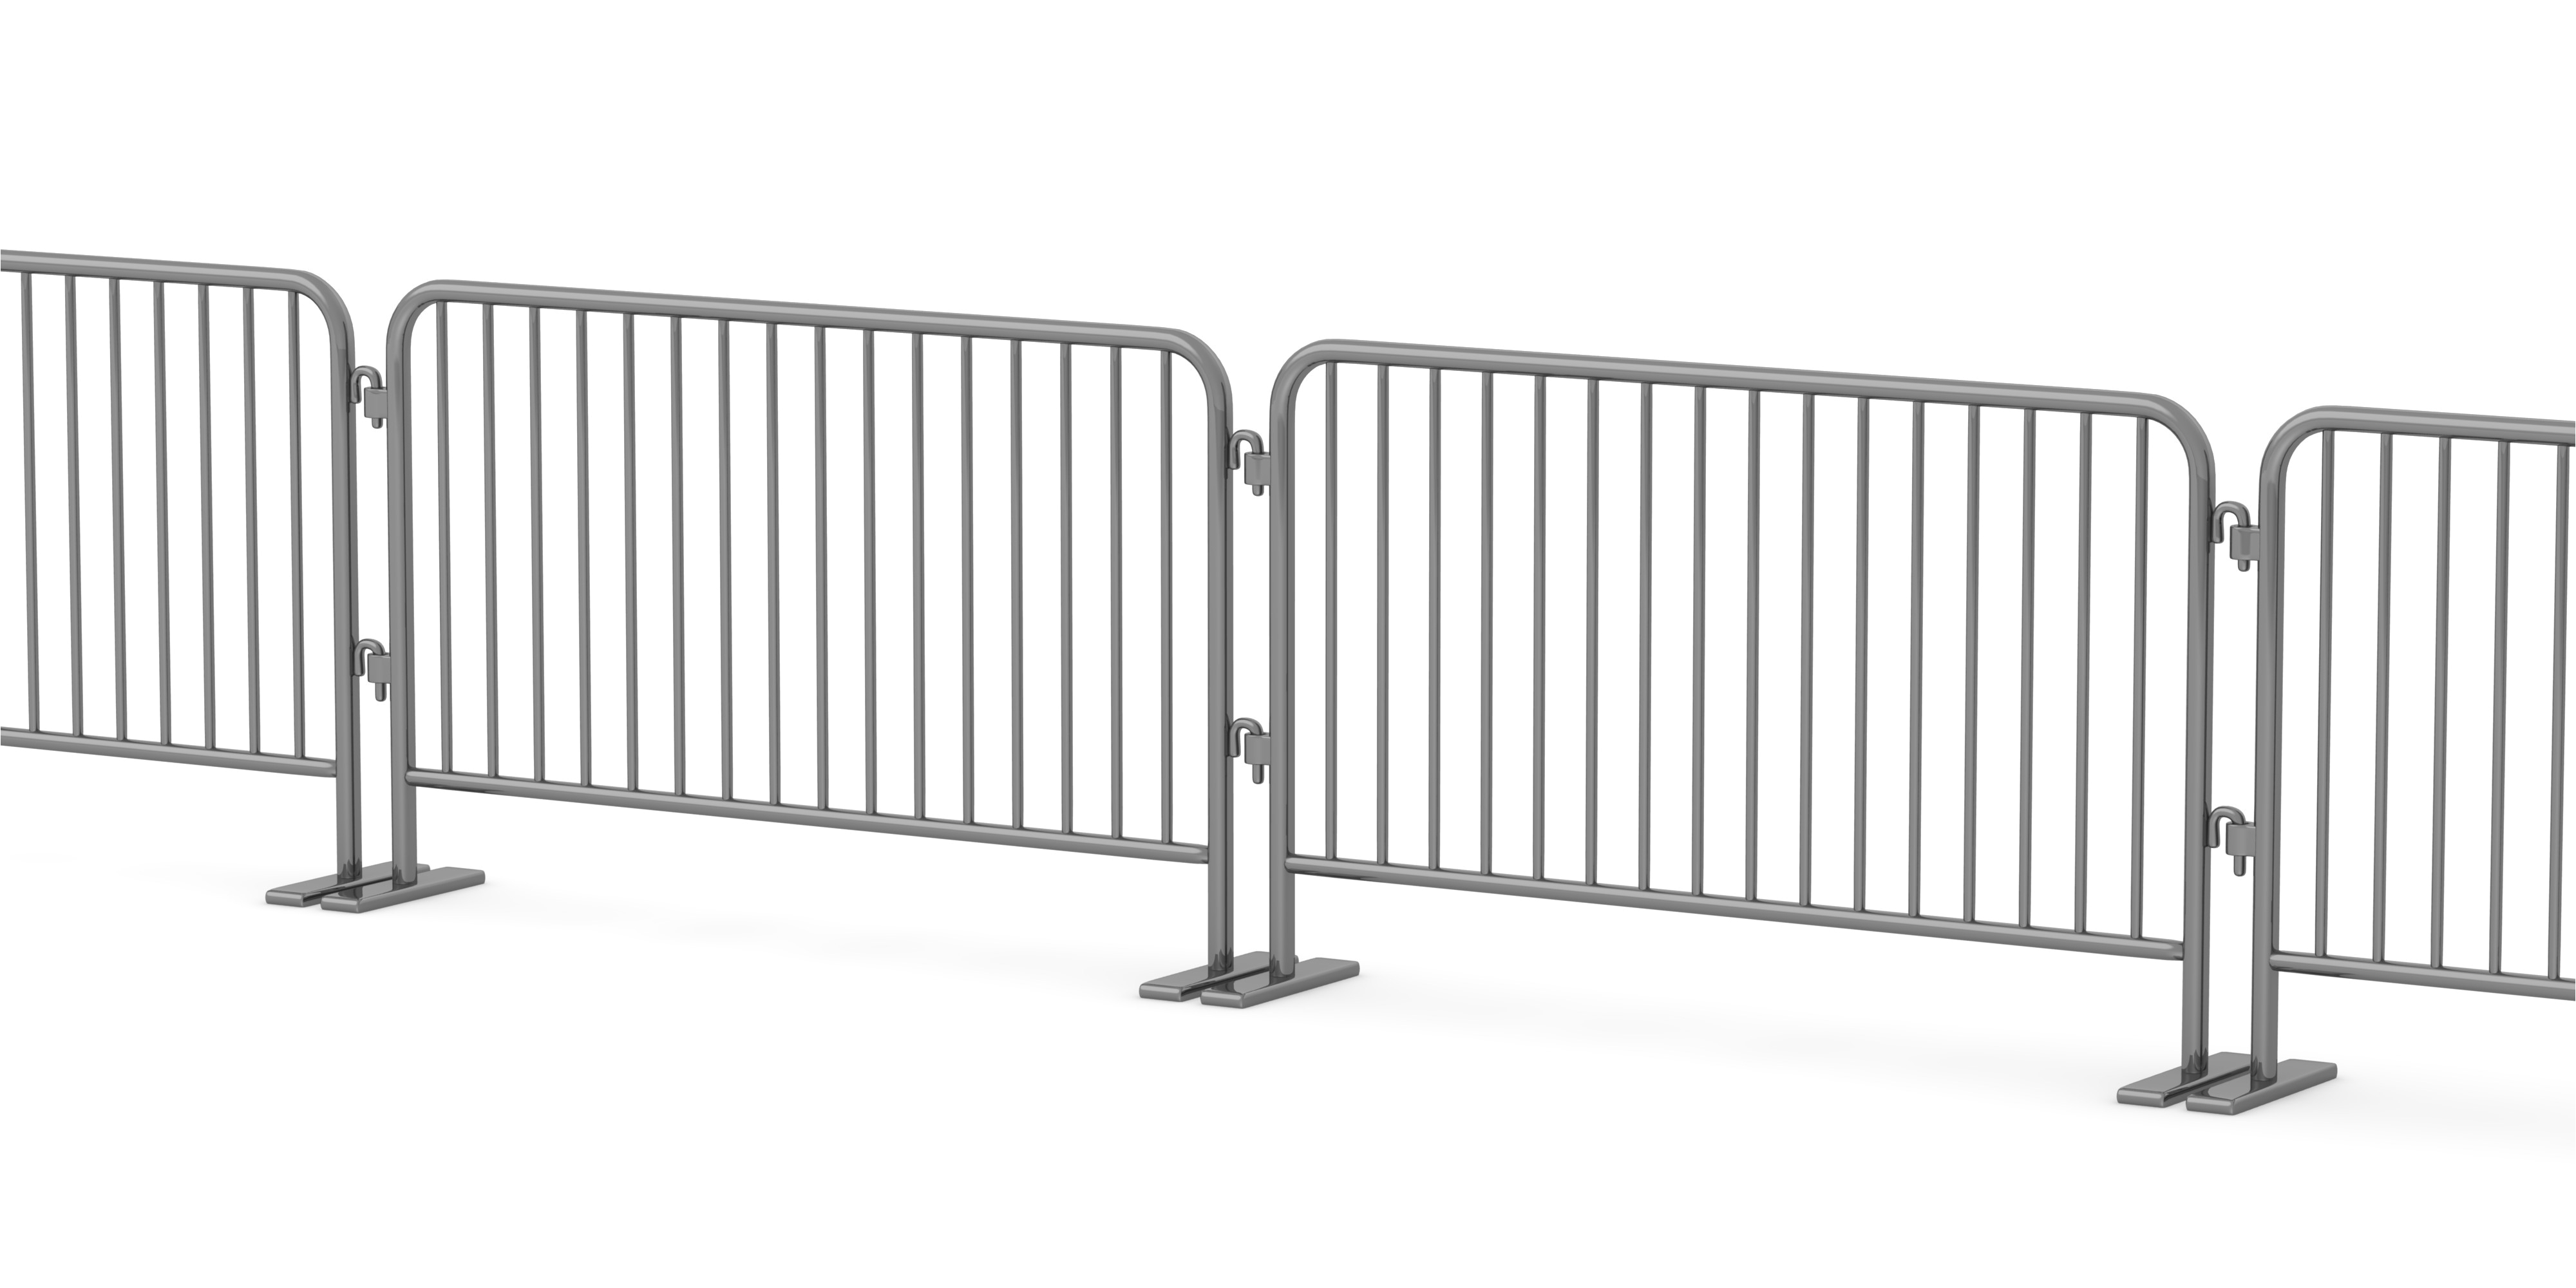 bike rack barricade fence rentals johnny on the spot throughout dimensions 4000 x 2000